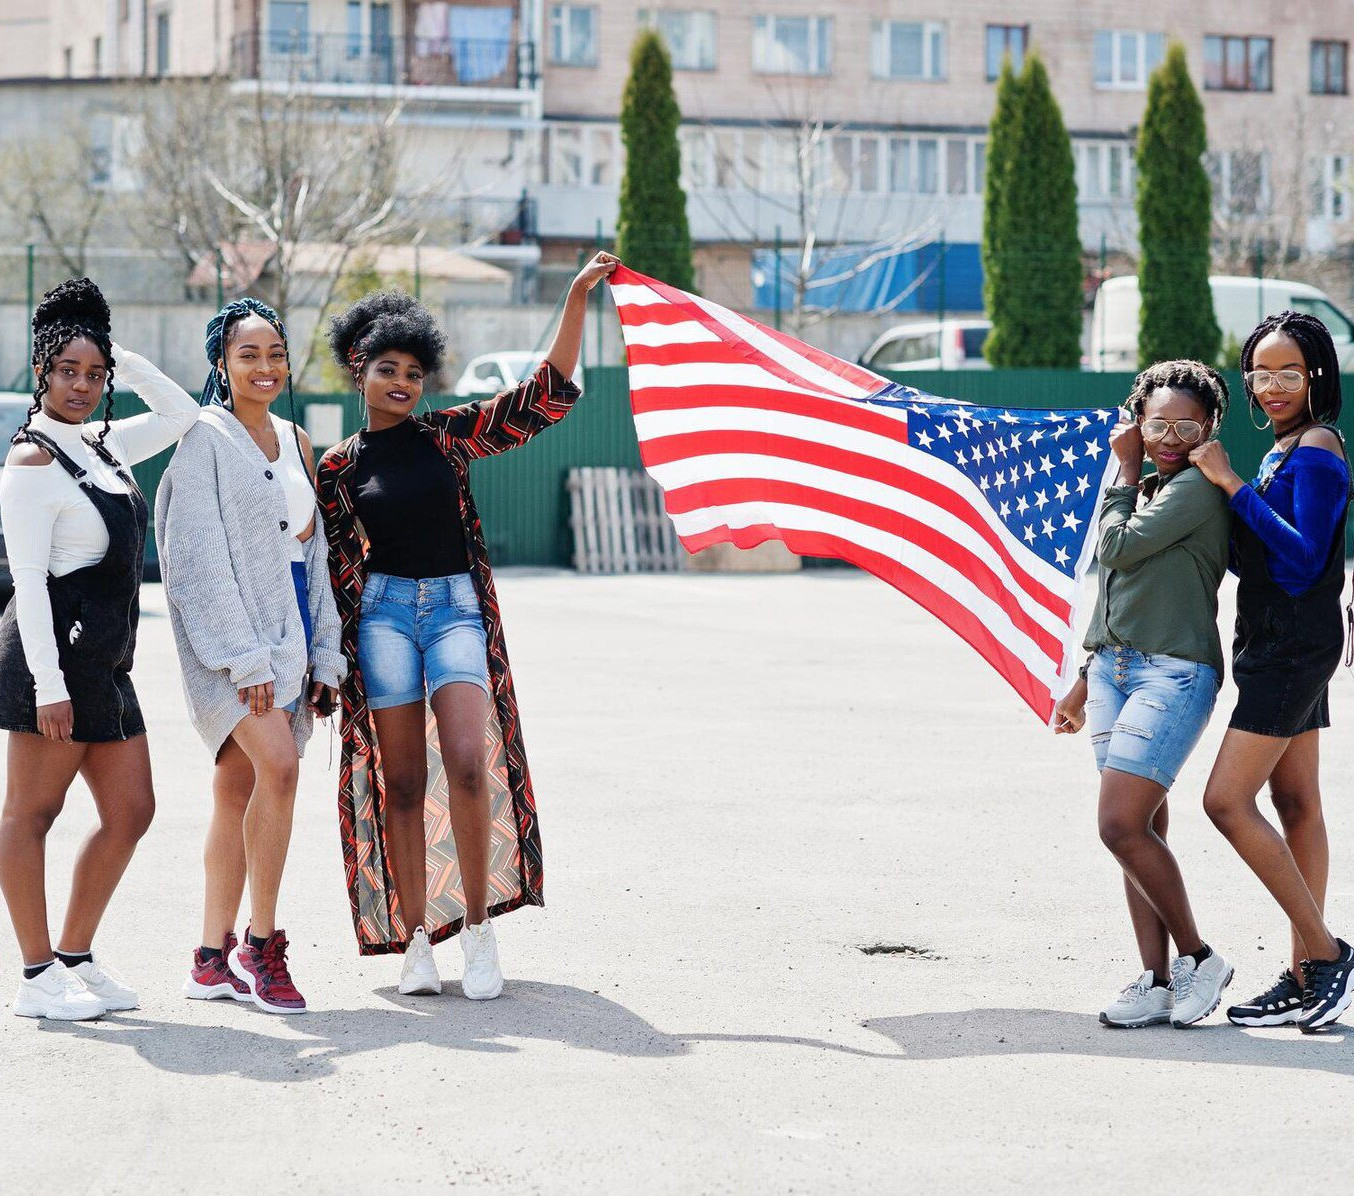 How Can A Nigerian Become A U.S. Citizen?